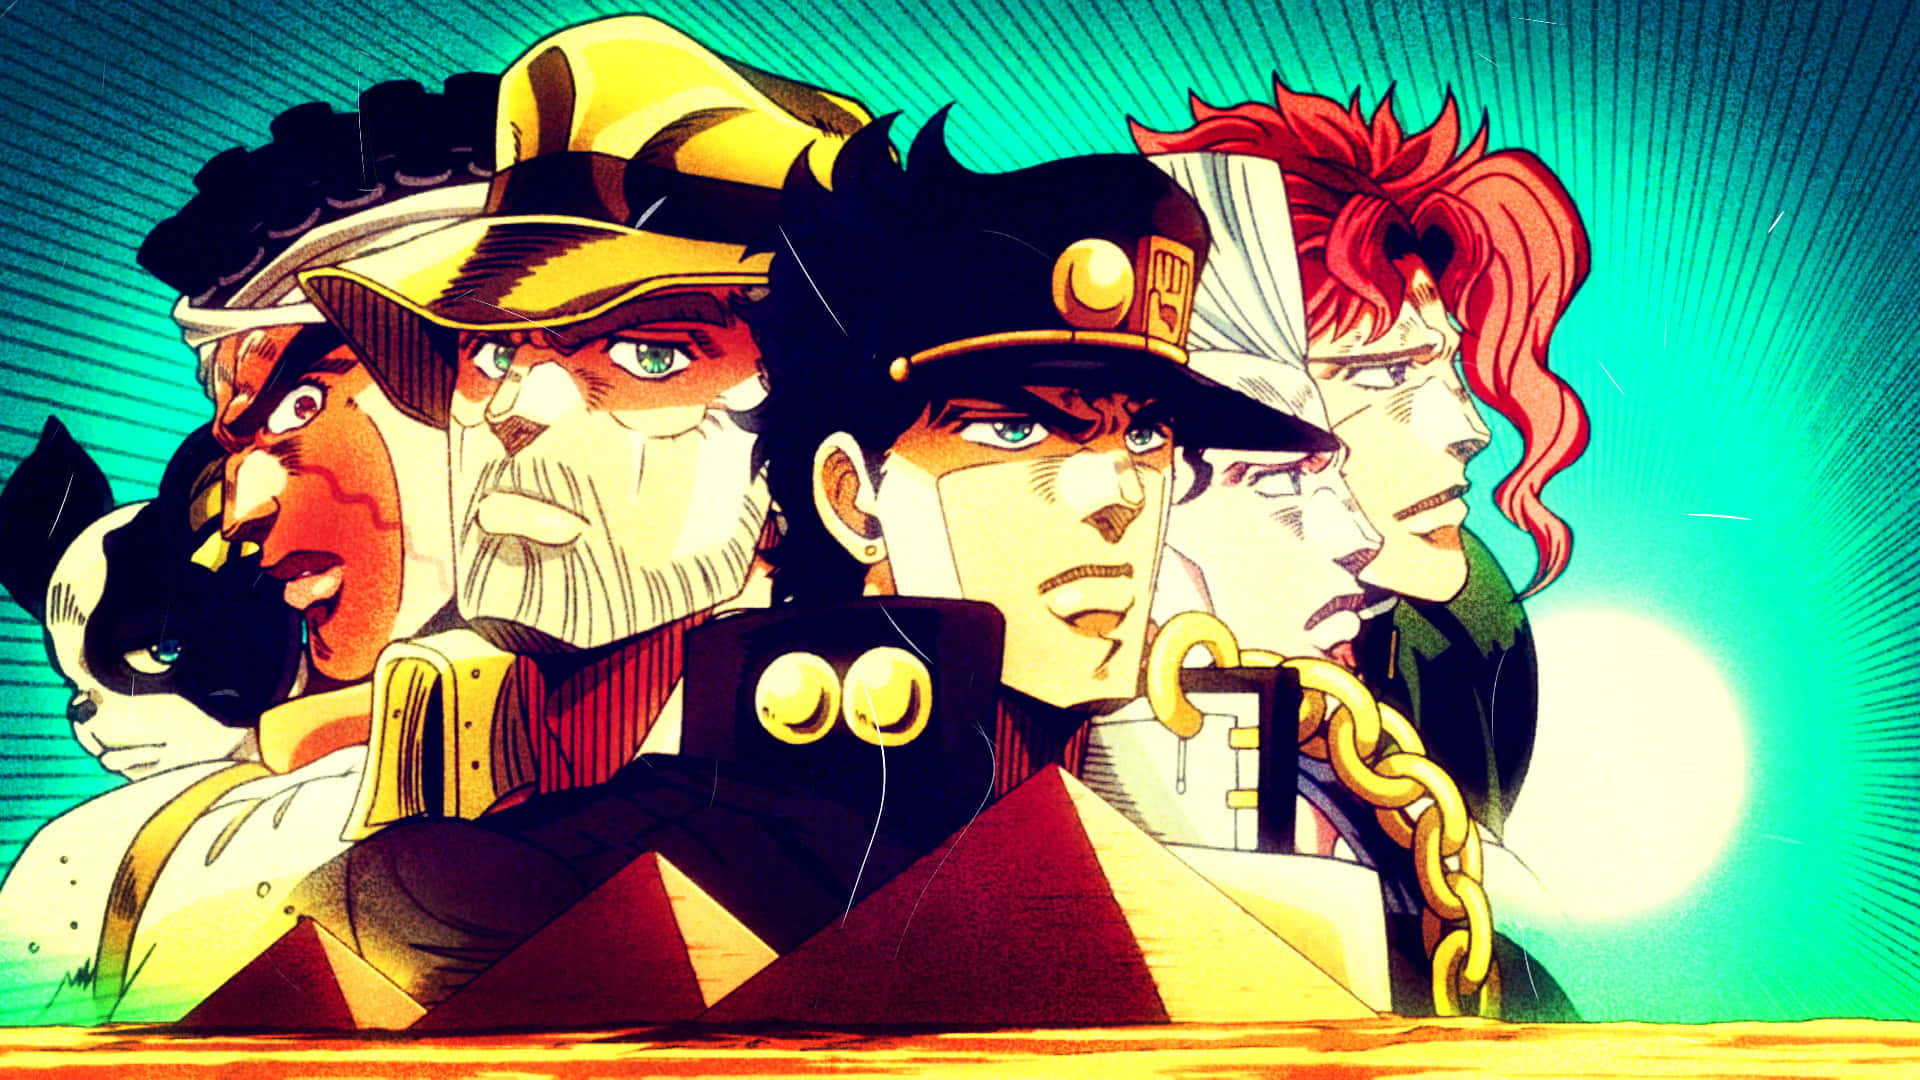 Jotaro Kujo posing confidently in an action-packed scene Wallpaper